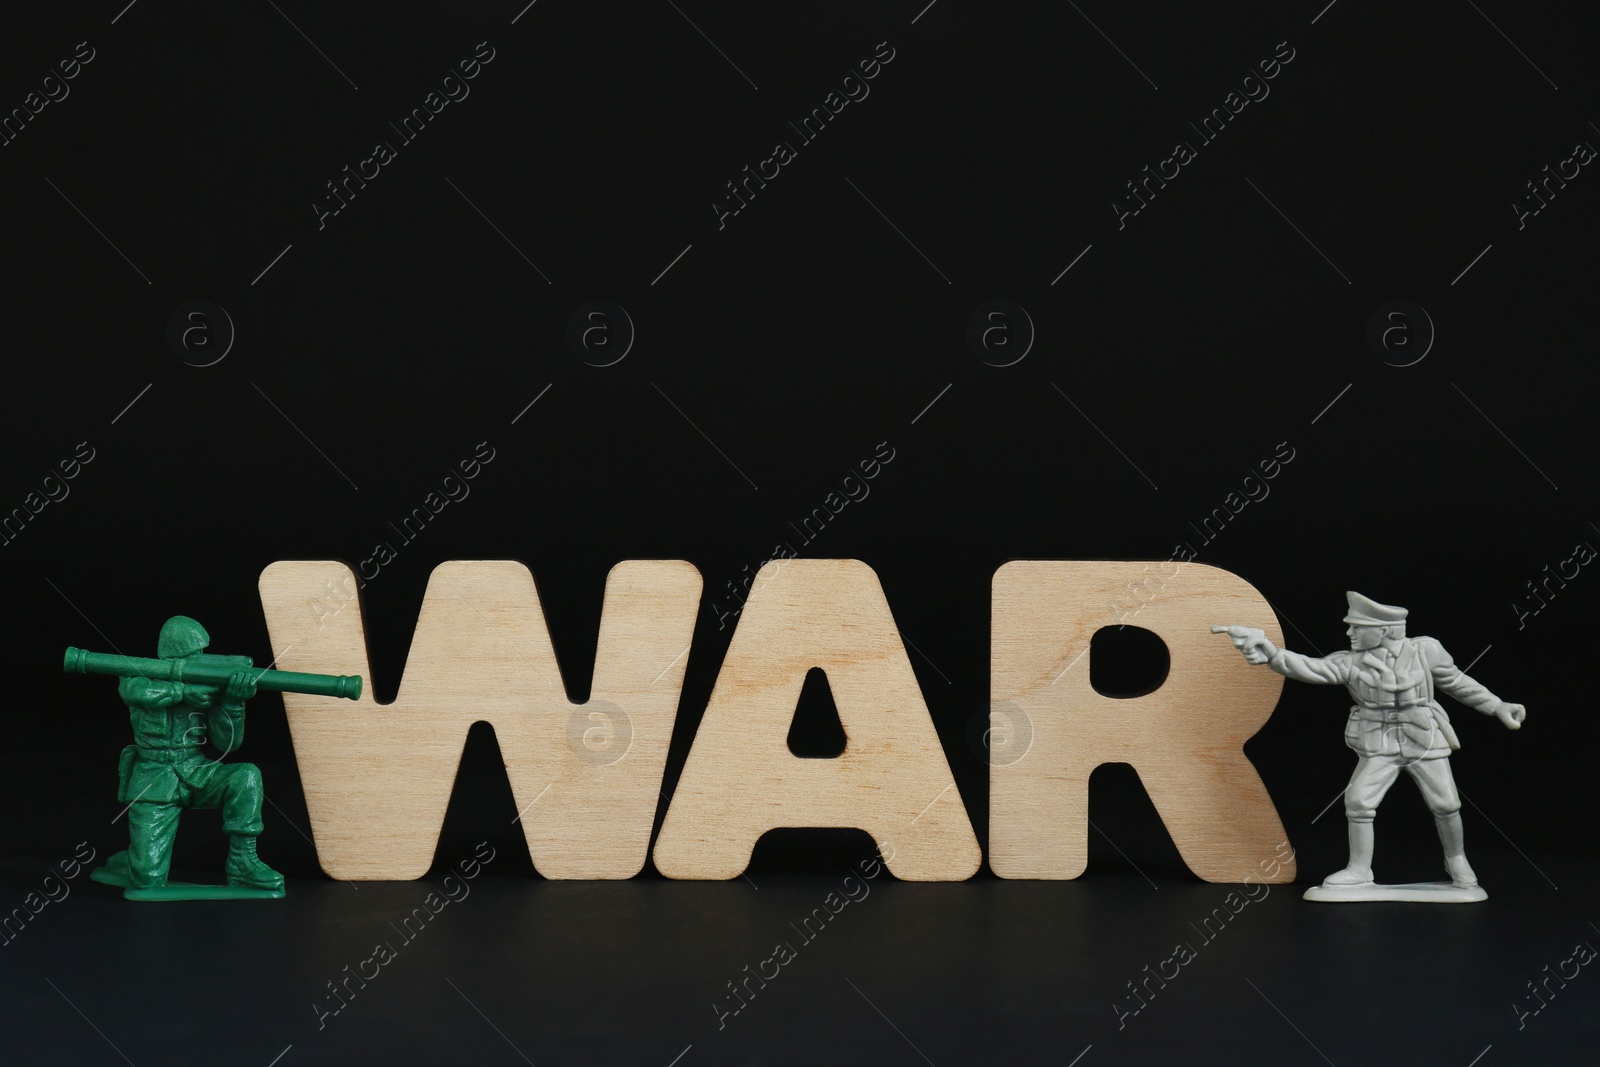 Photo of Word War made of wooden letters and toy soldiers on black background